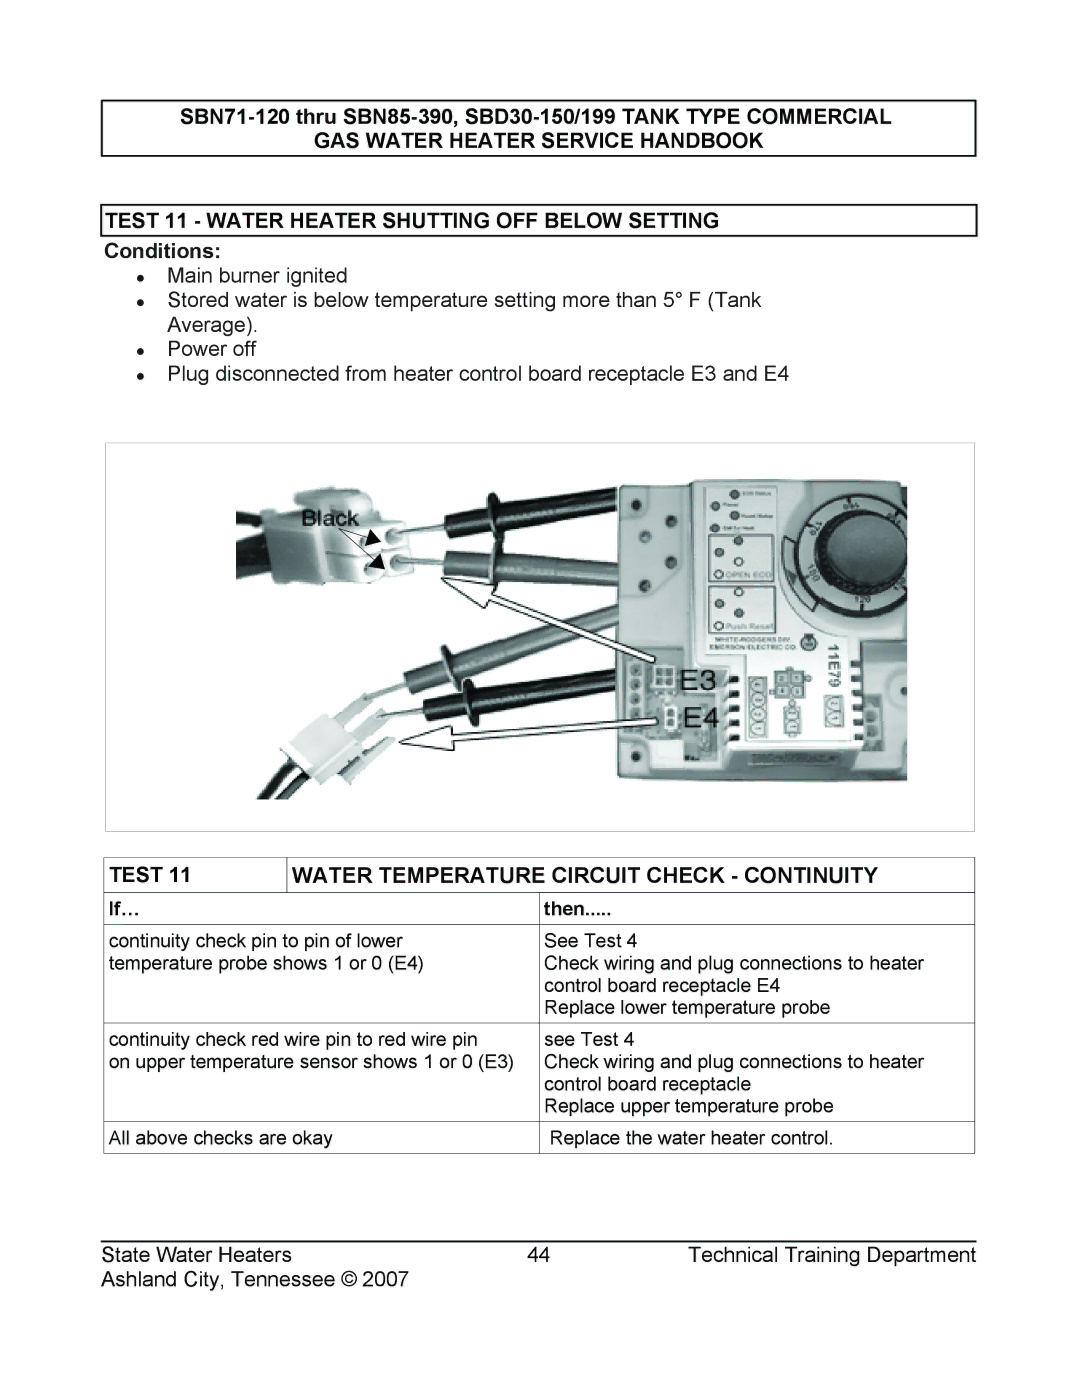 State Industries SBD30 150, SBN85 390 (A), SBN71 120, SBD30 199, SERIES 108 manual Water Temperature Circuit Check Continuity 